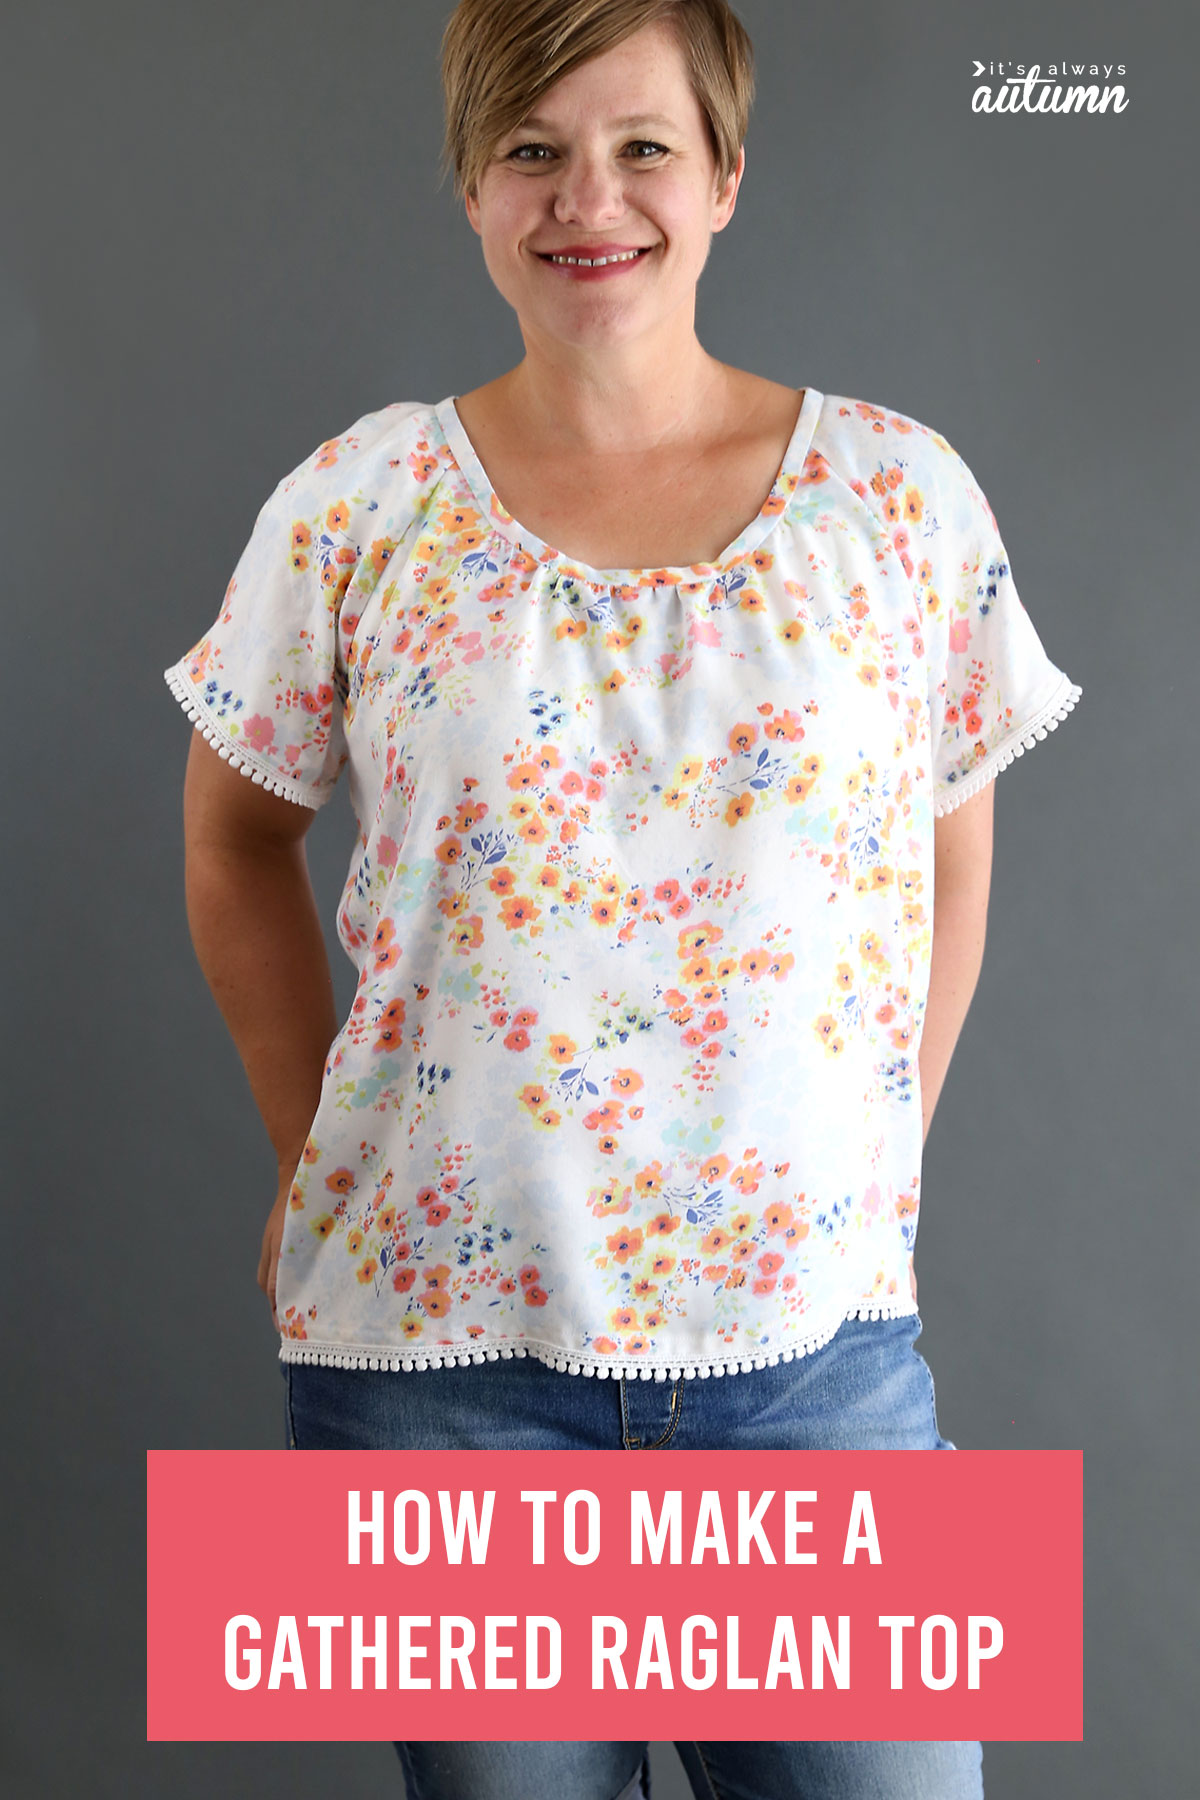 Learn how to sew a pretty gathered raglan blouse with this sewing tutorial and pattern